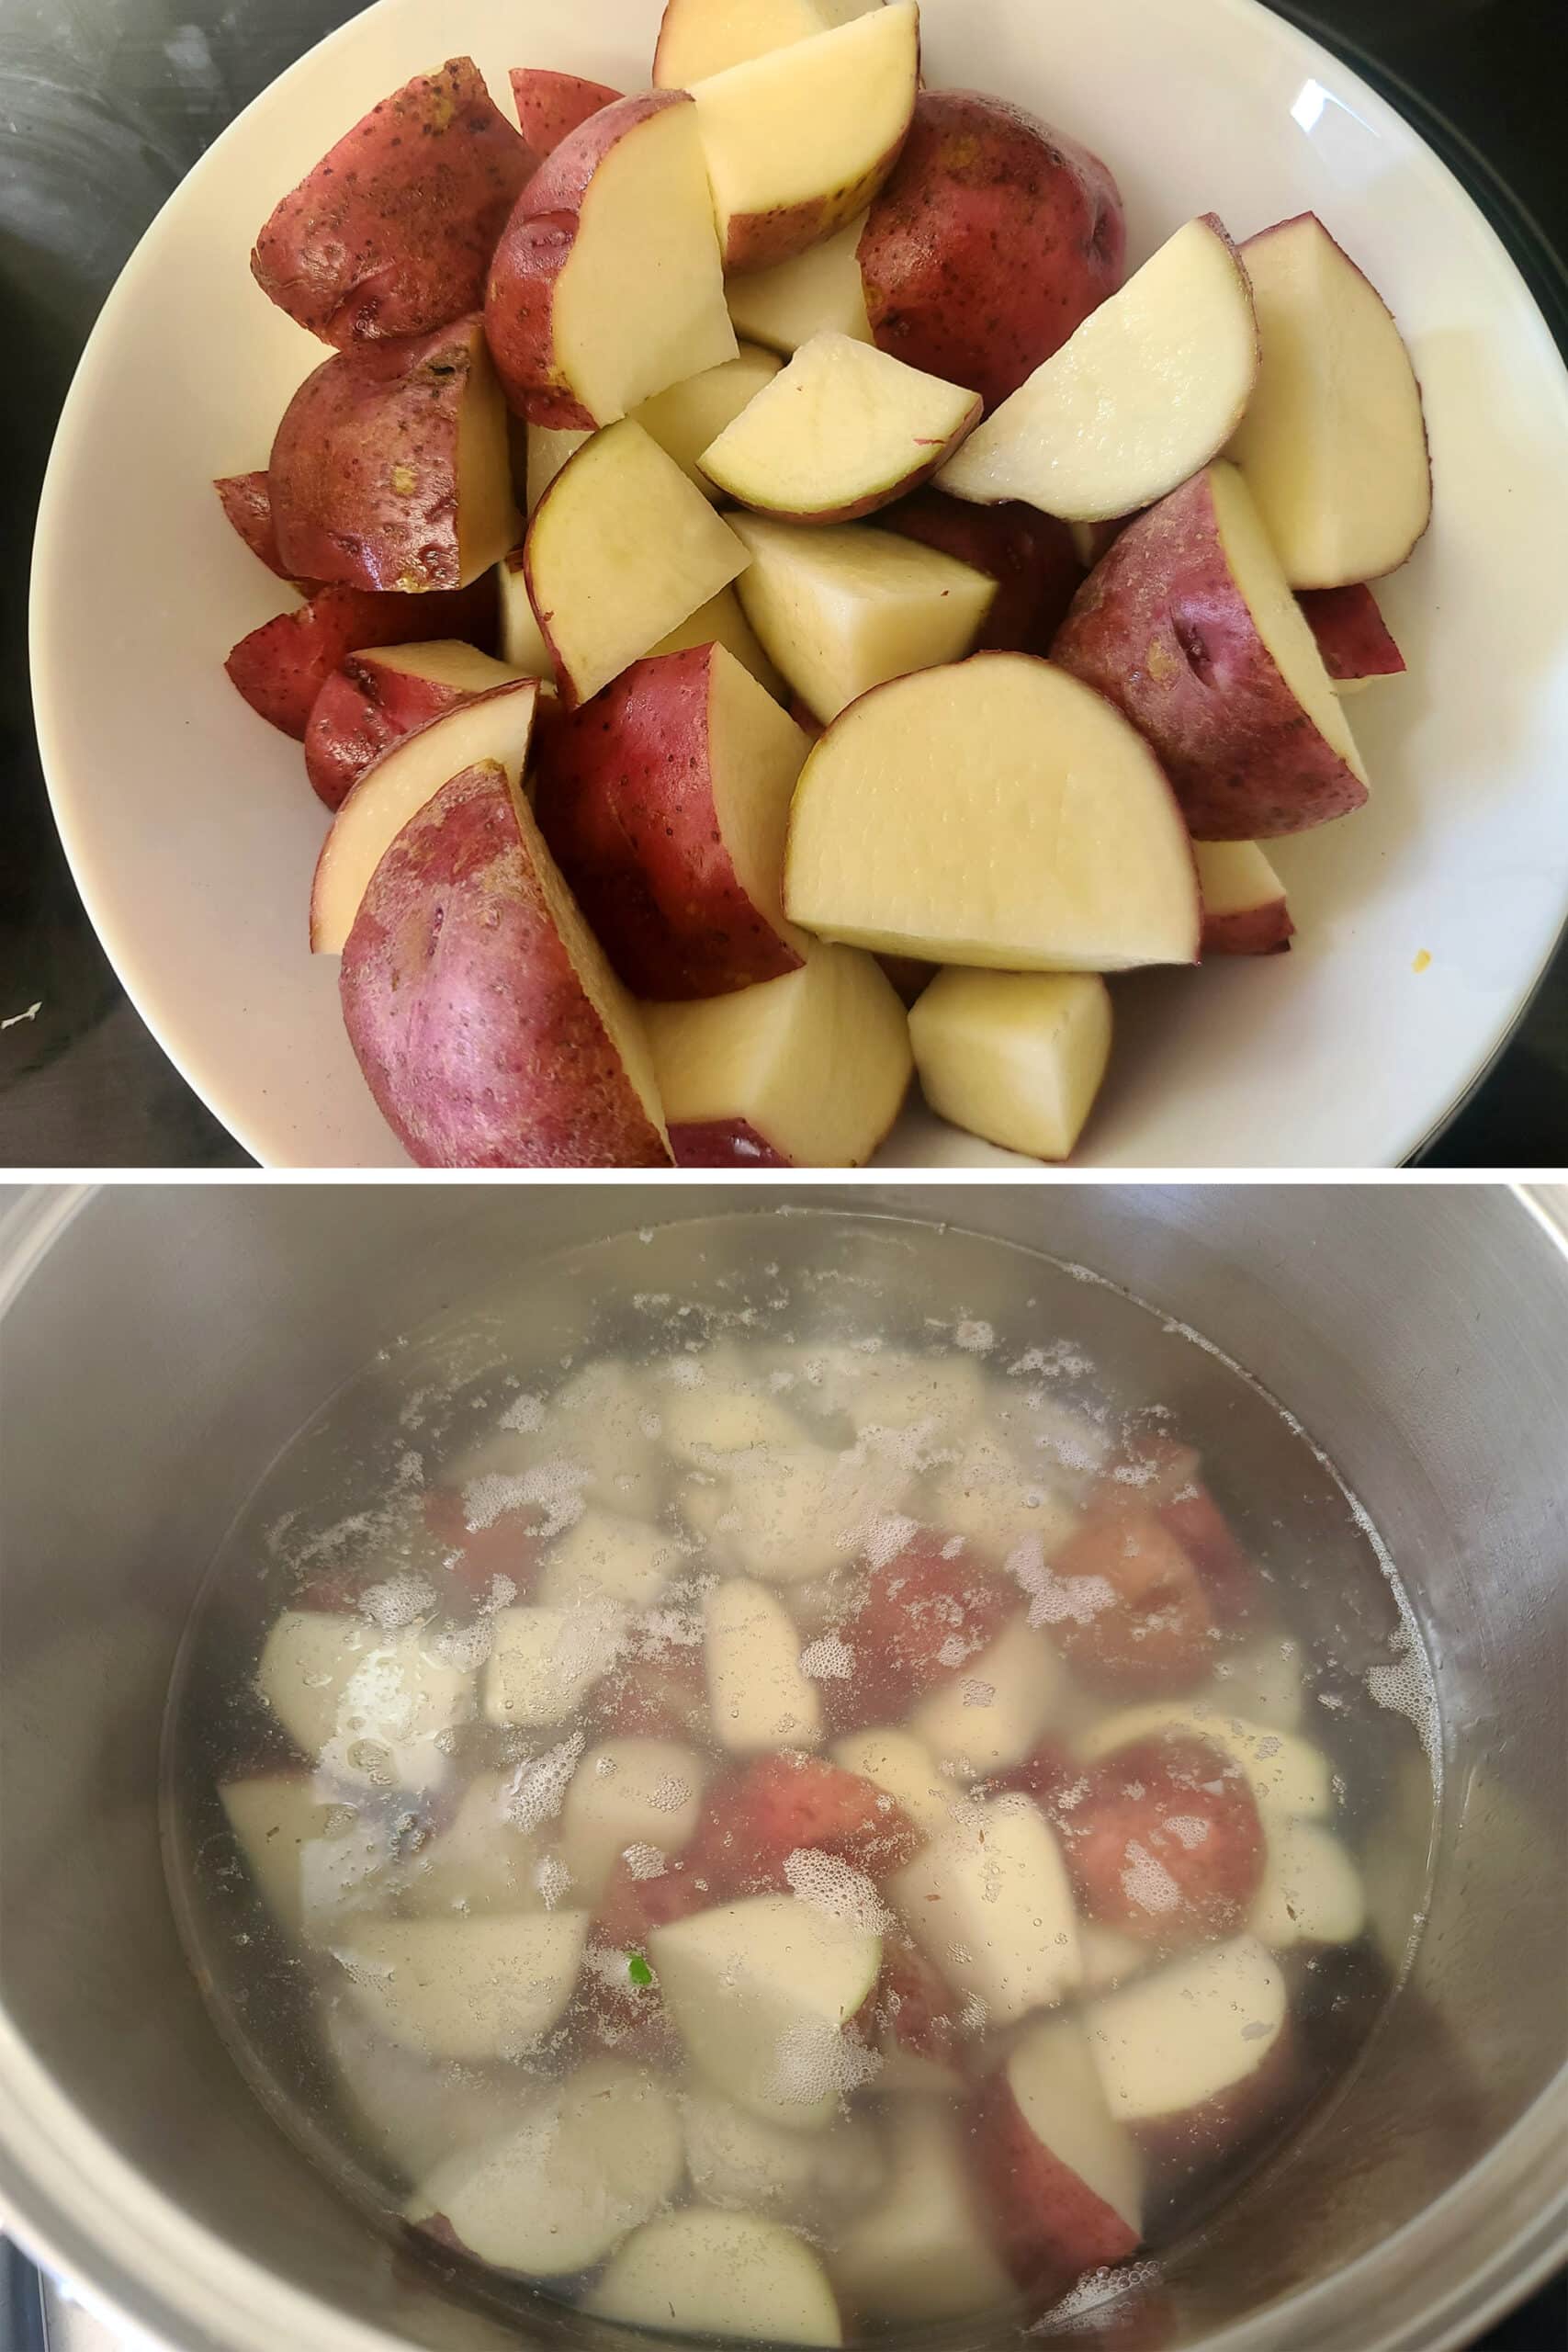 A 2 part image showing the chopped potatoes in a bowl, then in a pot of boiling water.